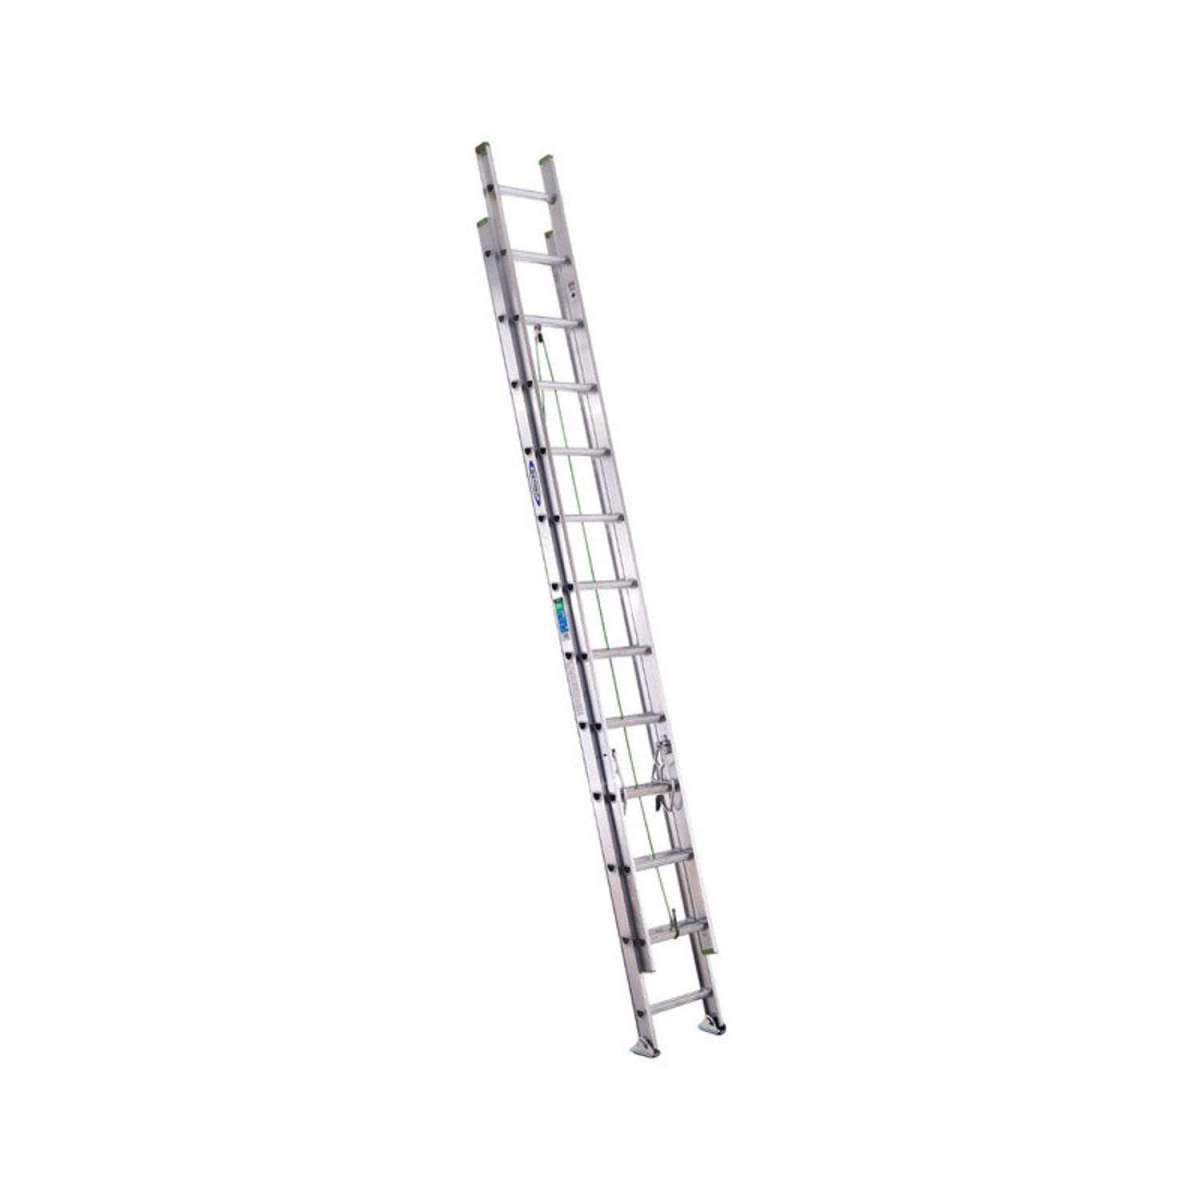 A Werner extension ladder against a white background.